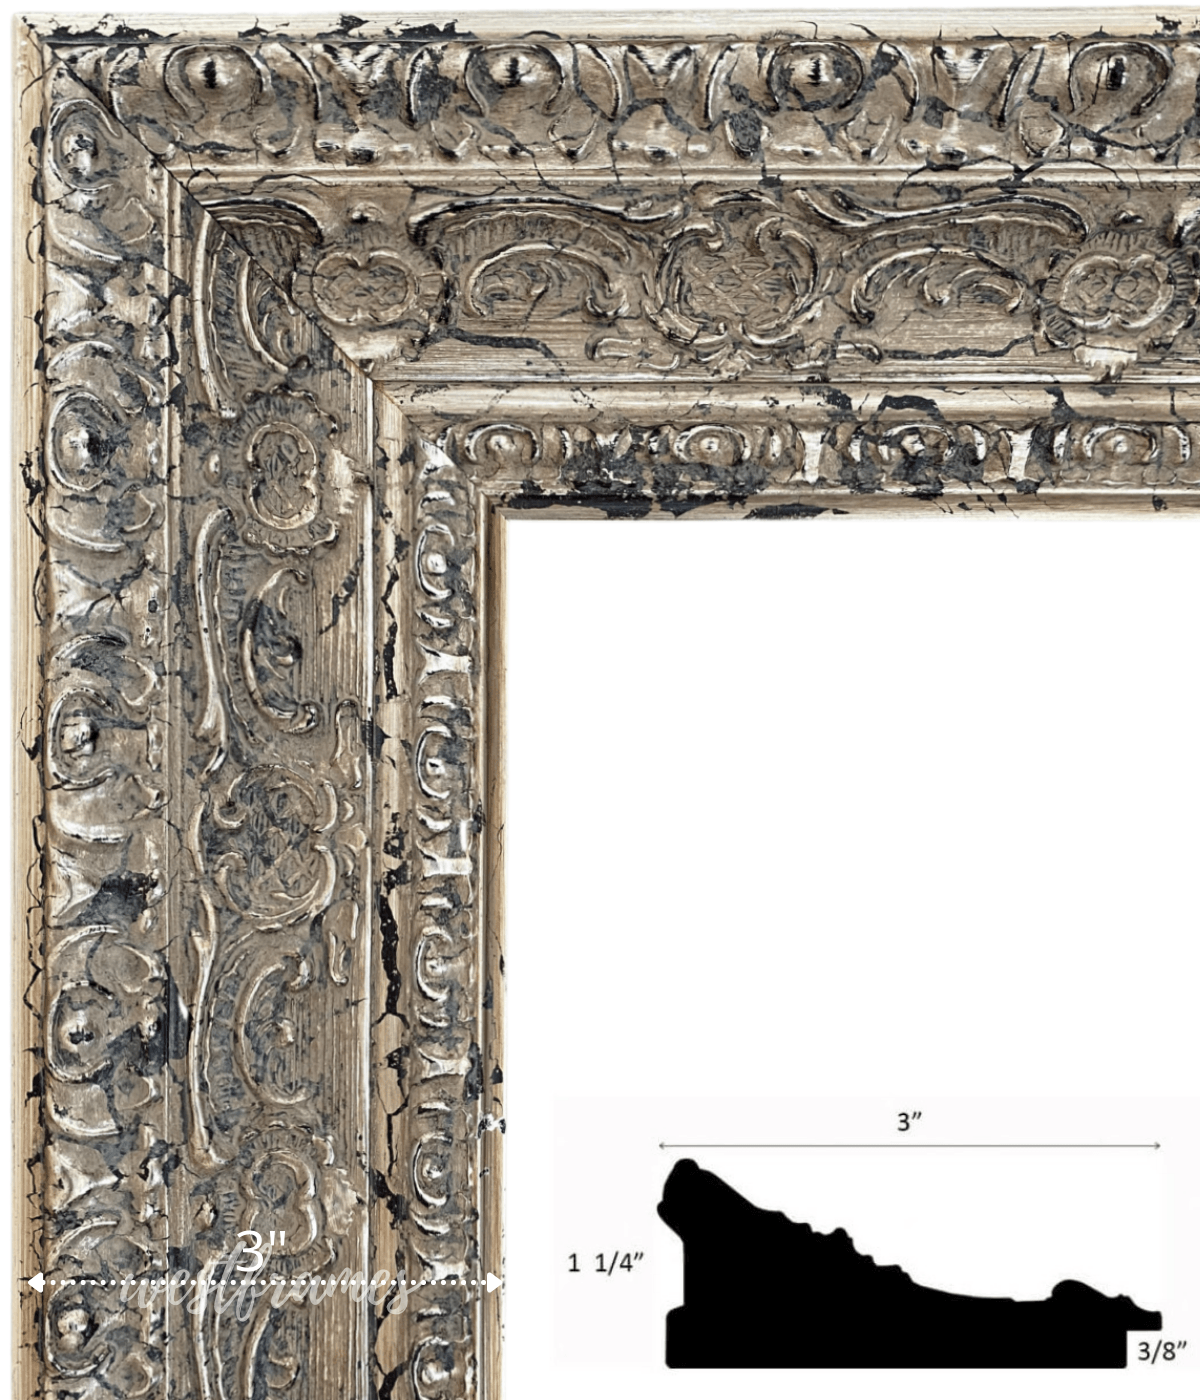 Parisienne Ornate Embossed Wood Picture Frame Antique Silver Gold Patina Finish 3" Wide - West Frames